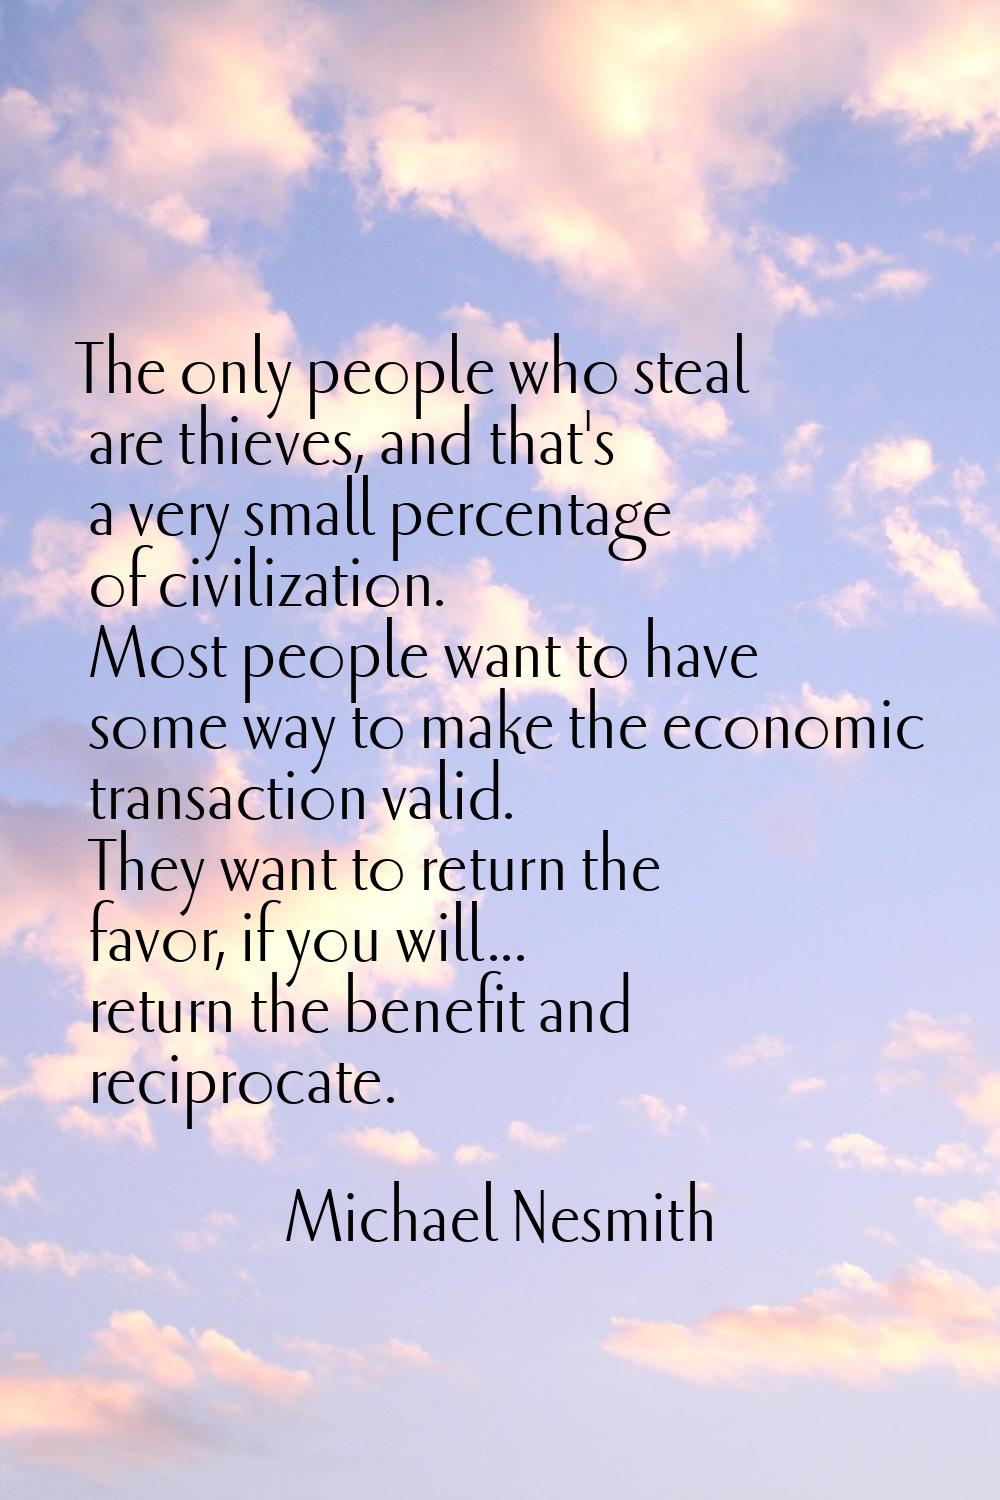 The only people who steal are thieves, and that's a very small percentage of civilization. Most peo